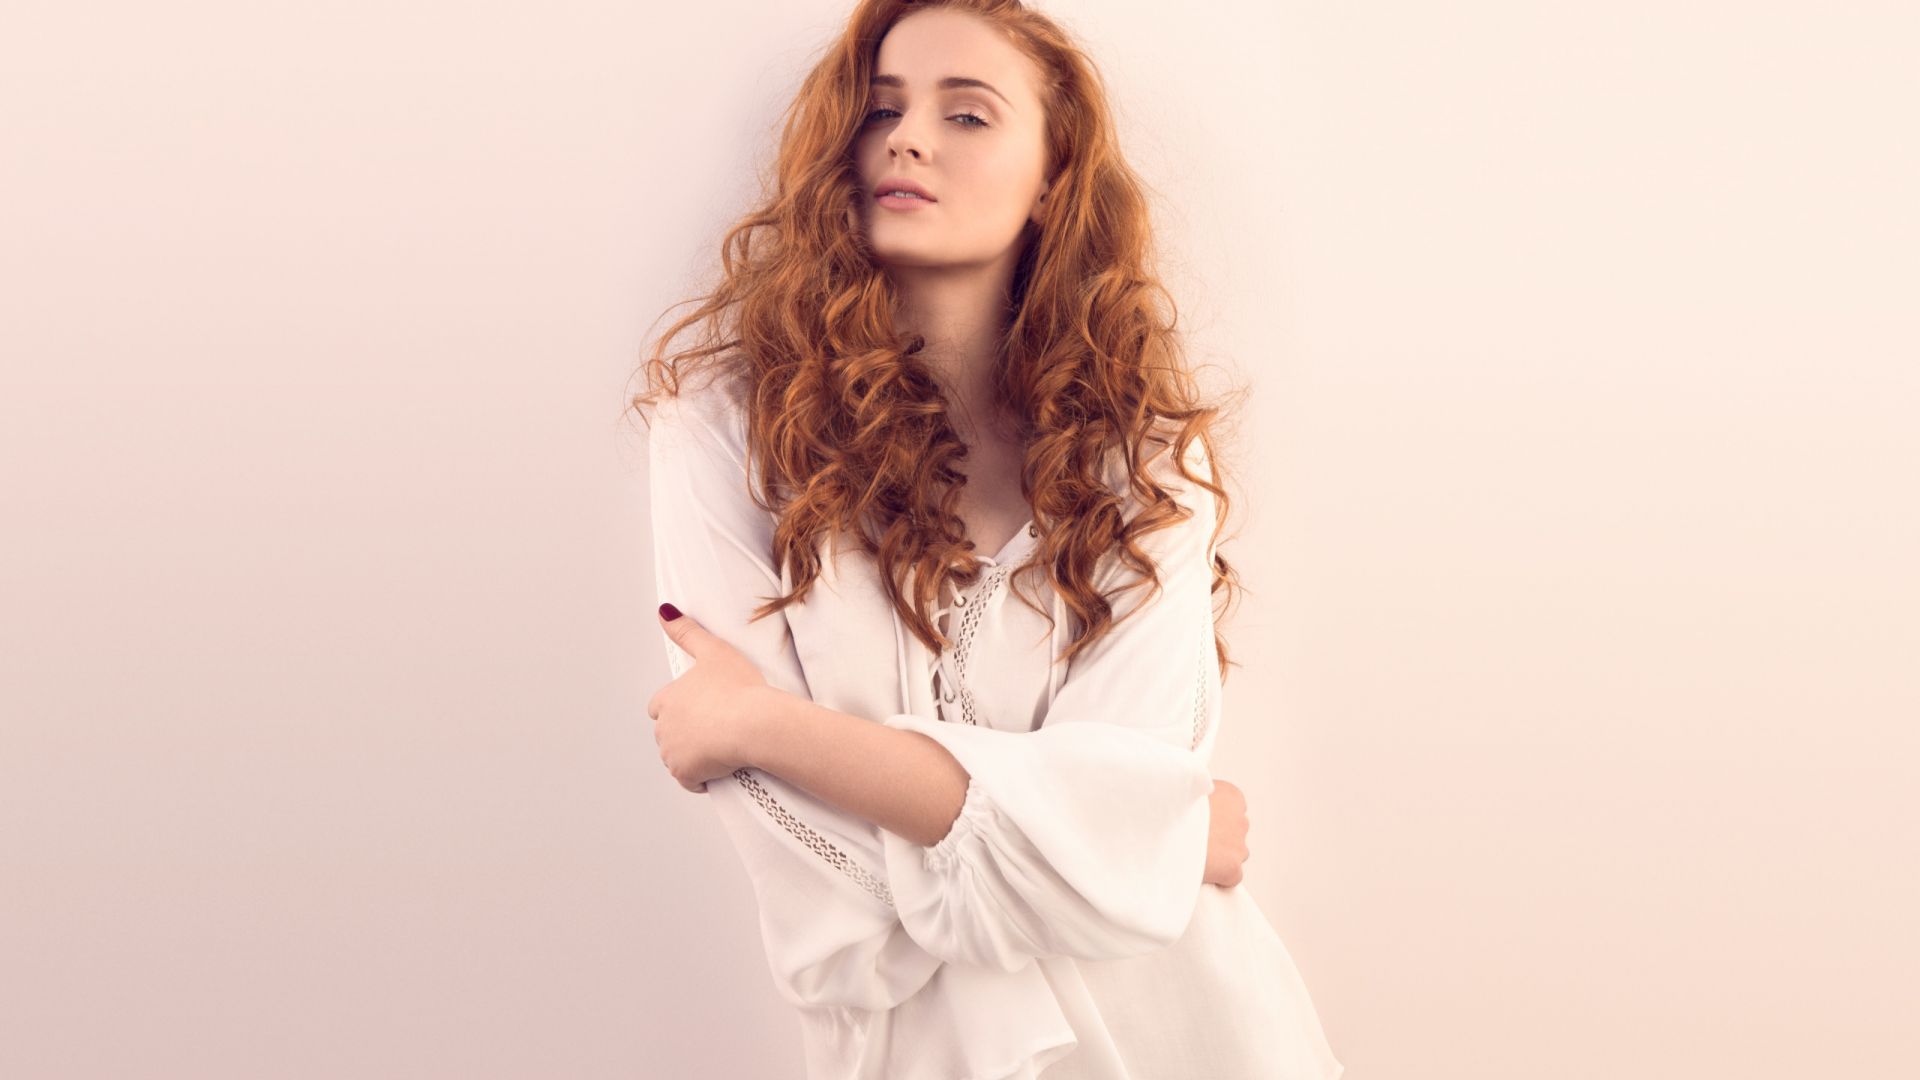 Sophie Turner in White Dress Wallpapers